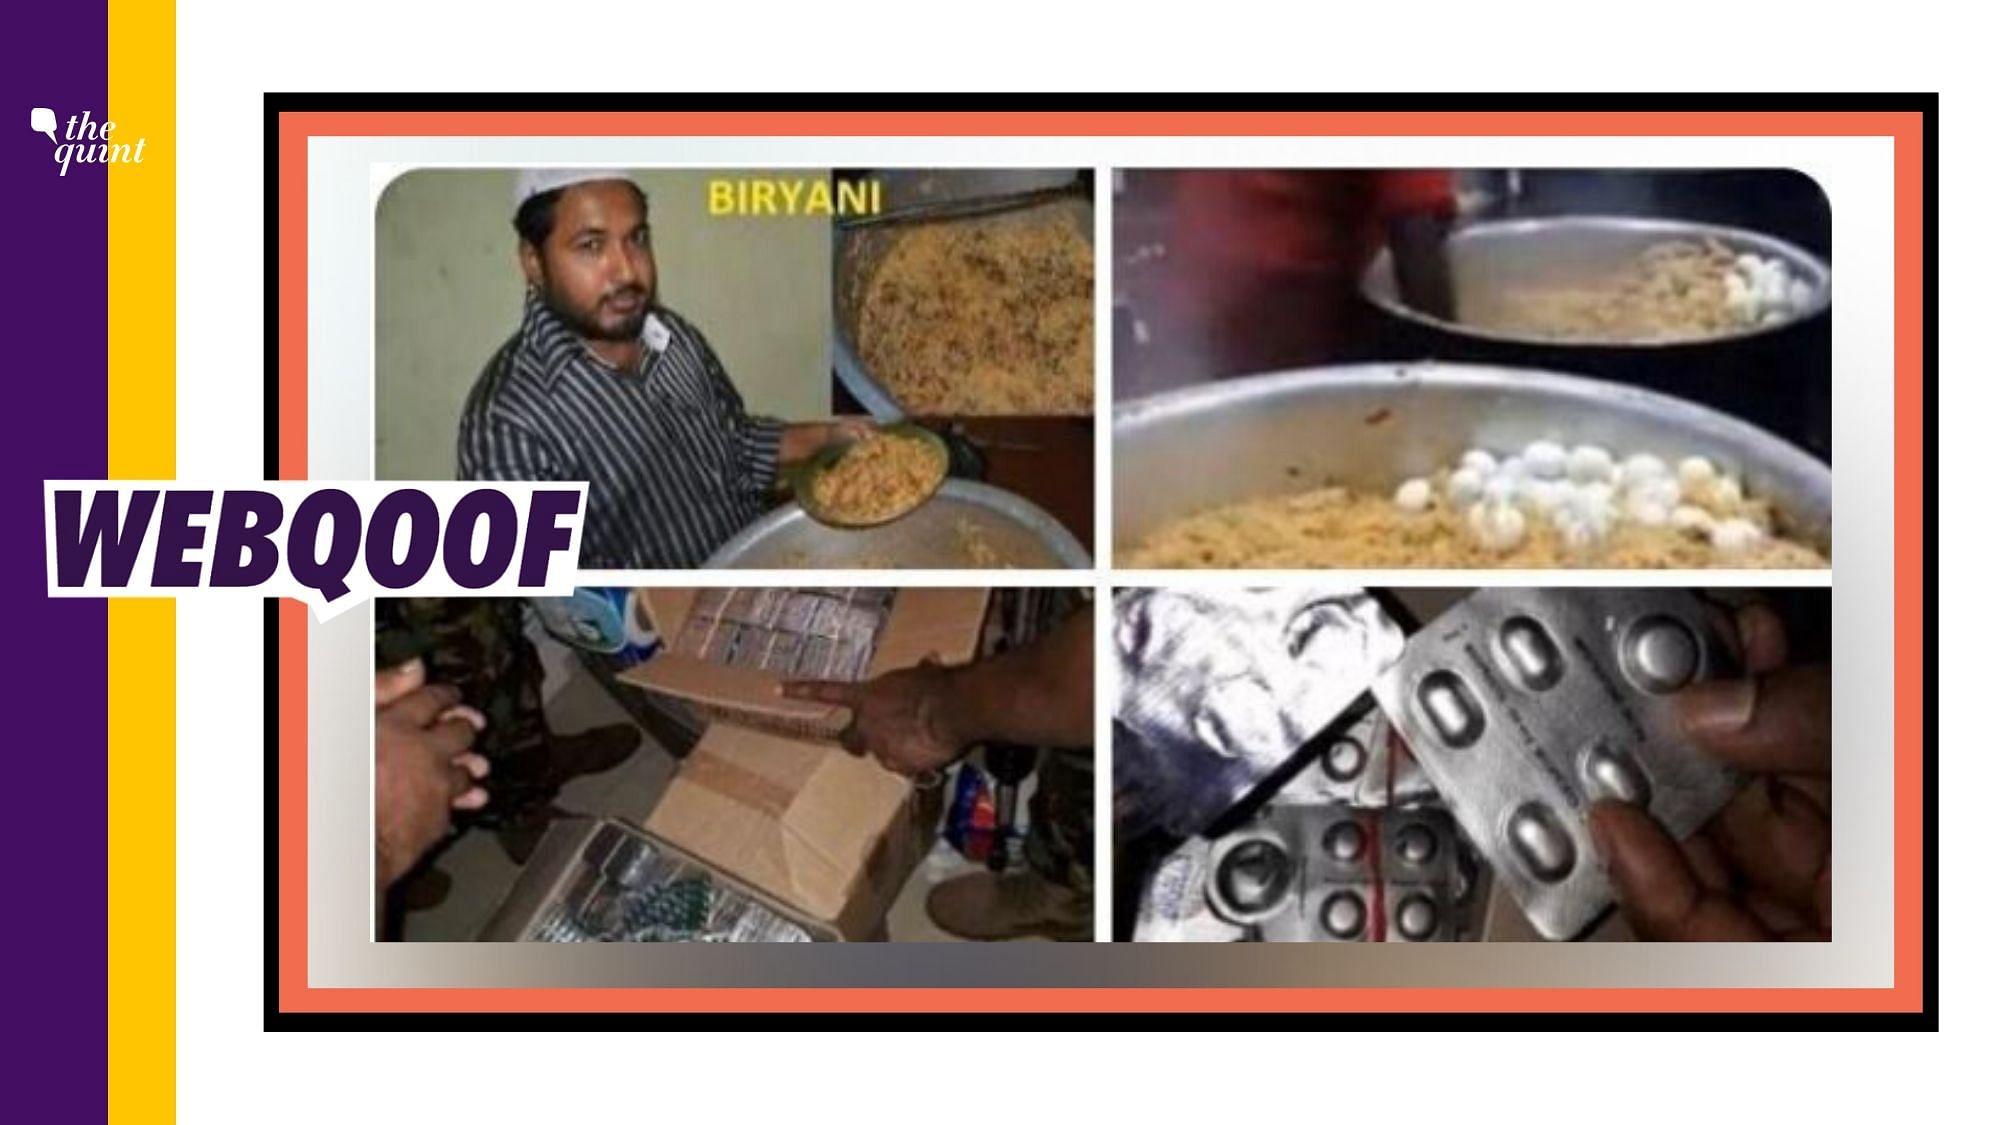 A collage of pictures is being circulated on social media with a claim that a restaurant based in Coimbatore is making biryani for Hindus ‘laced with tablets that makes one impotent’.